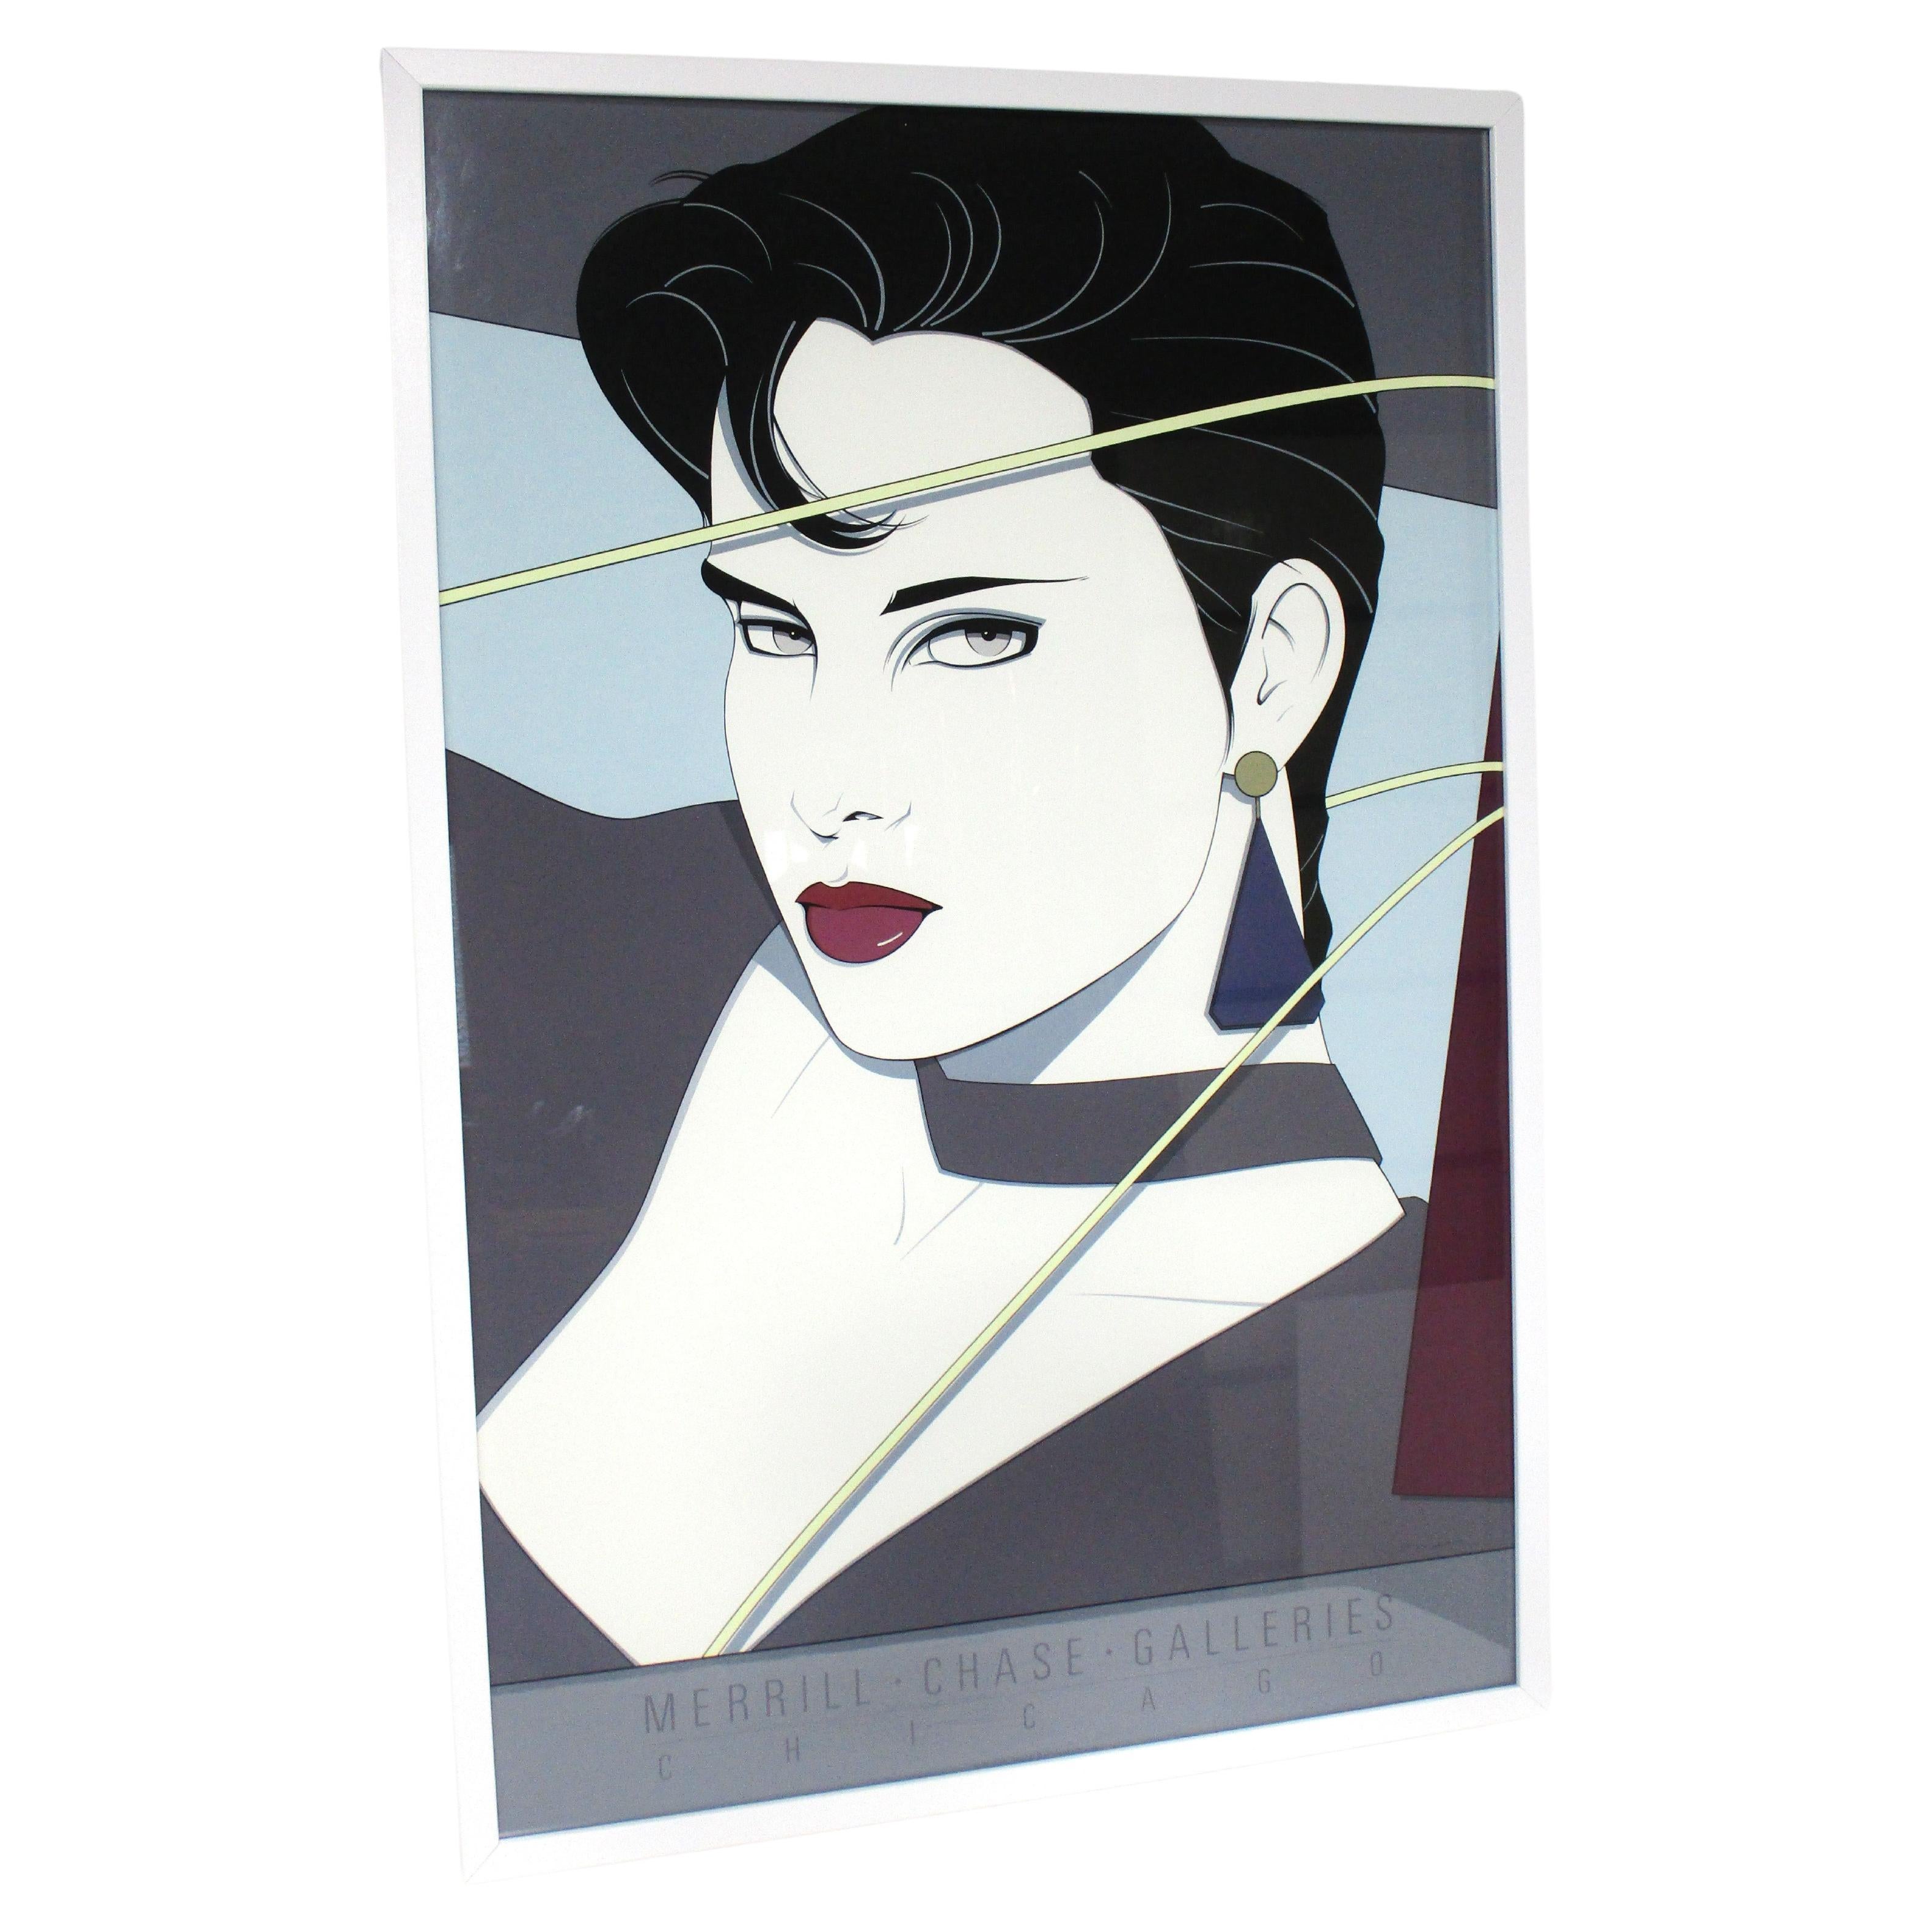 Patrick Nagel Merrill Chase Gallery Chicago sérigraphie des années 80 